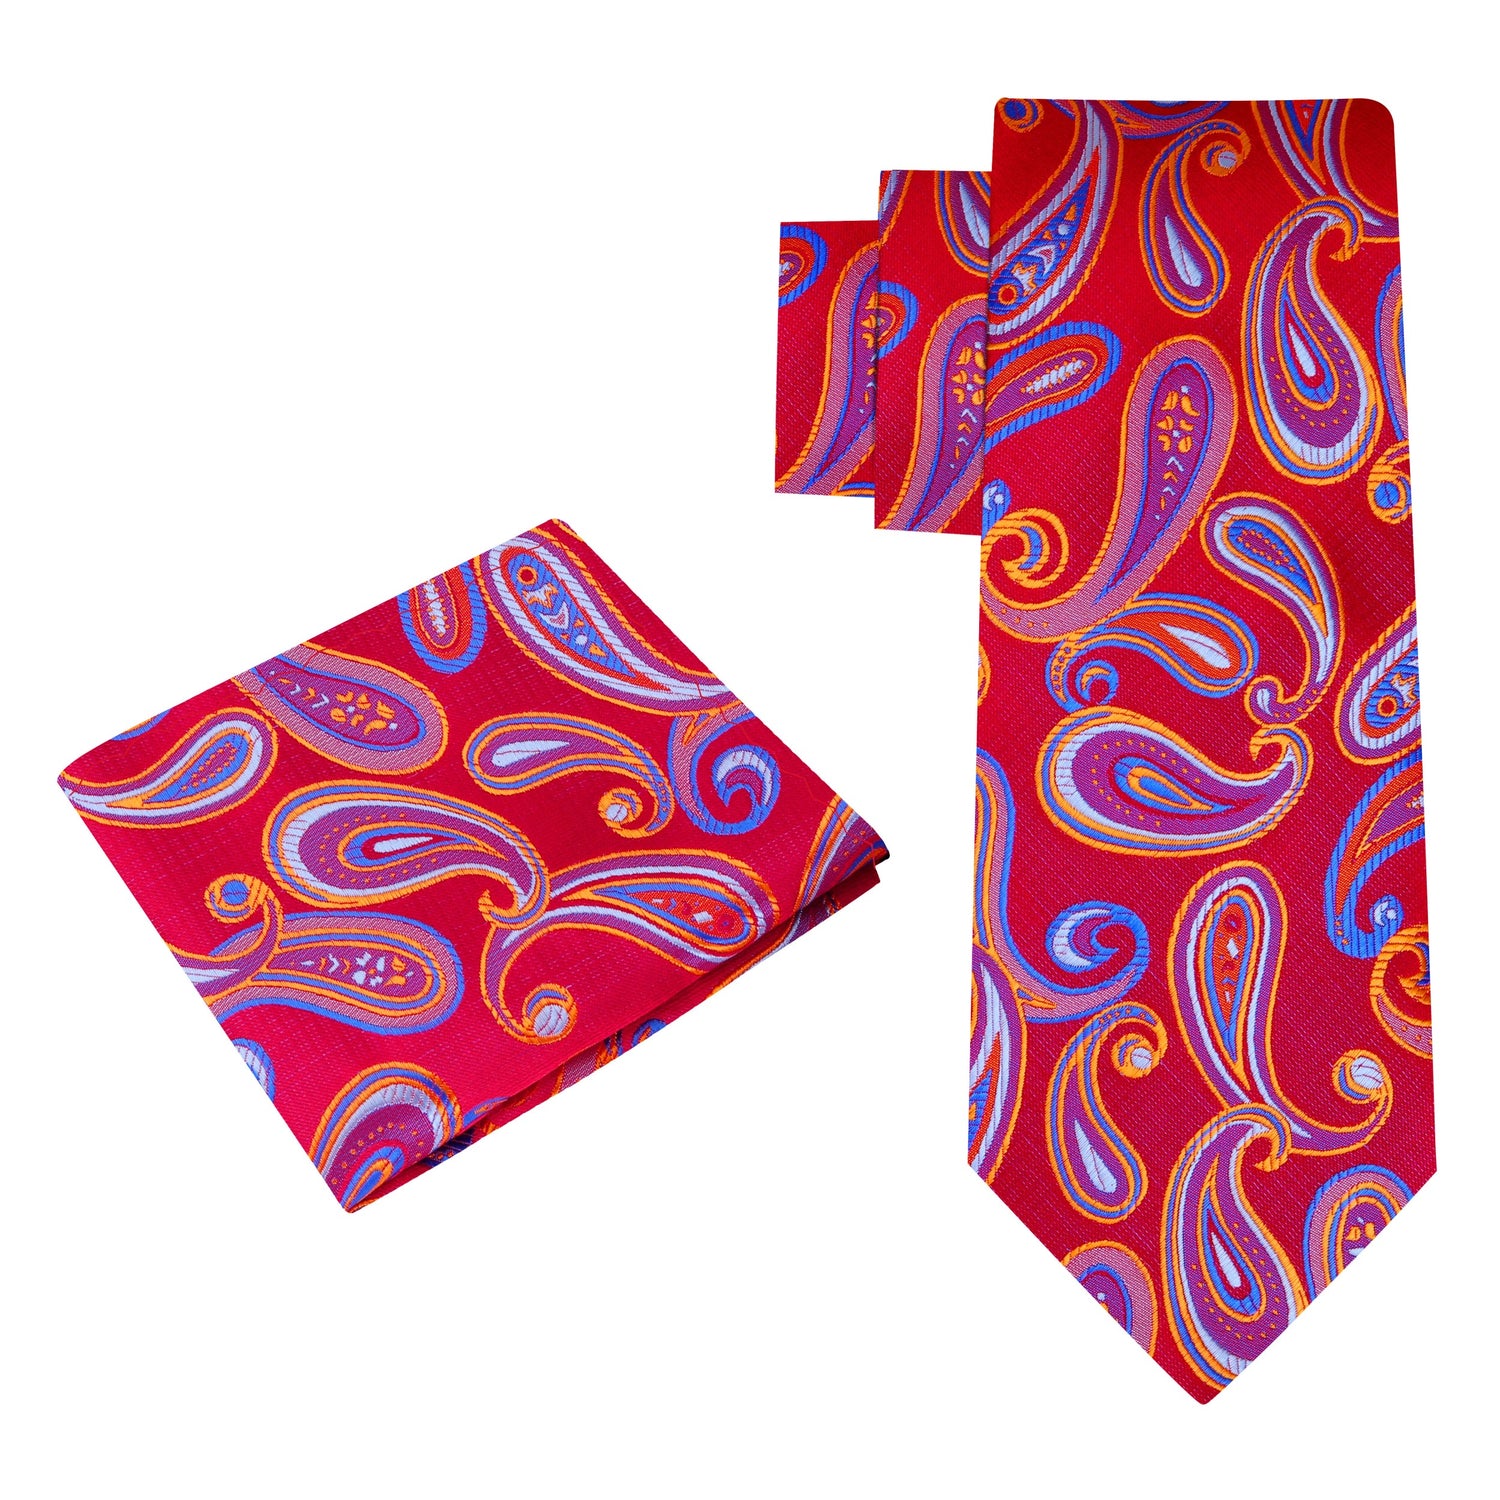 Alt View: A Red, Blue Color Paisley Pattern Silk Necktie, Matching Pocket Square